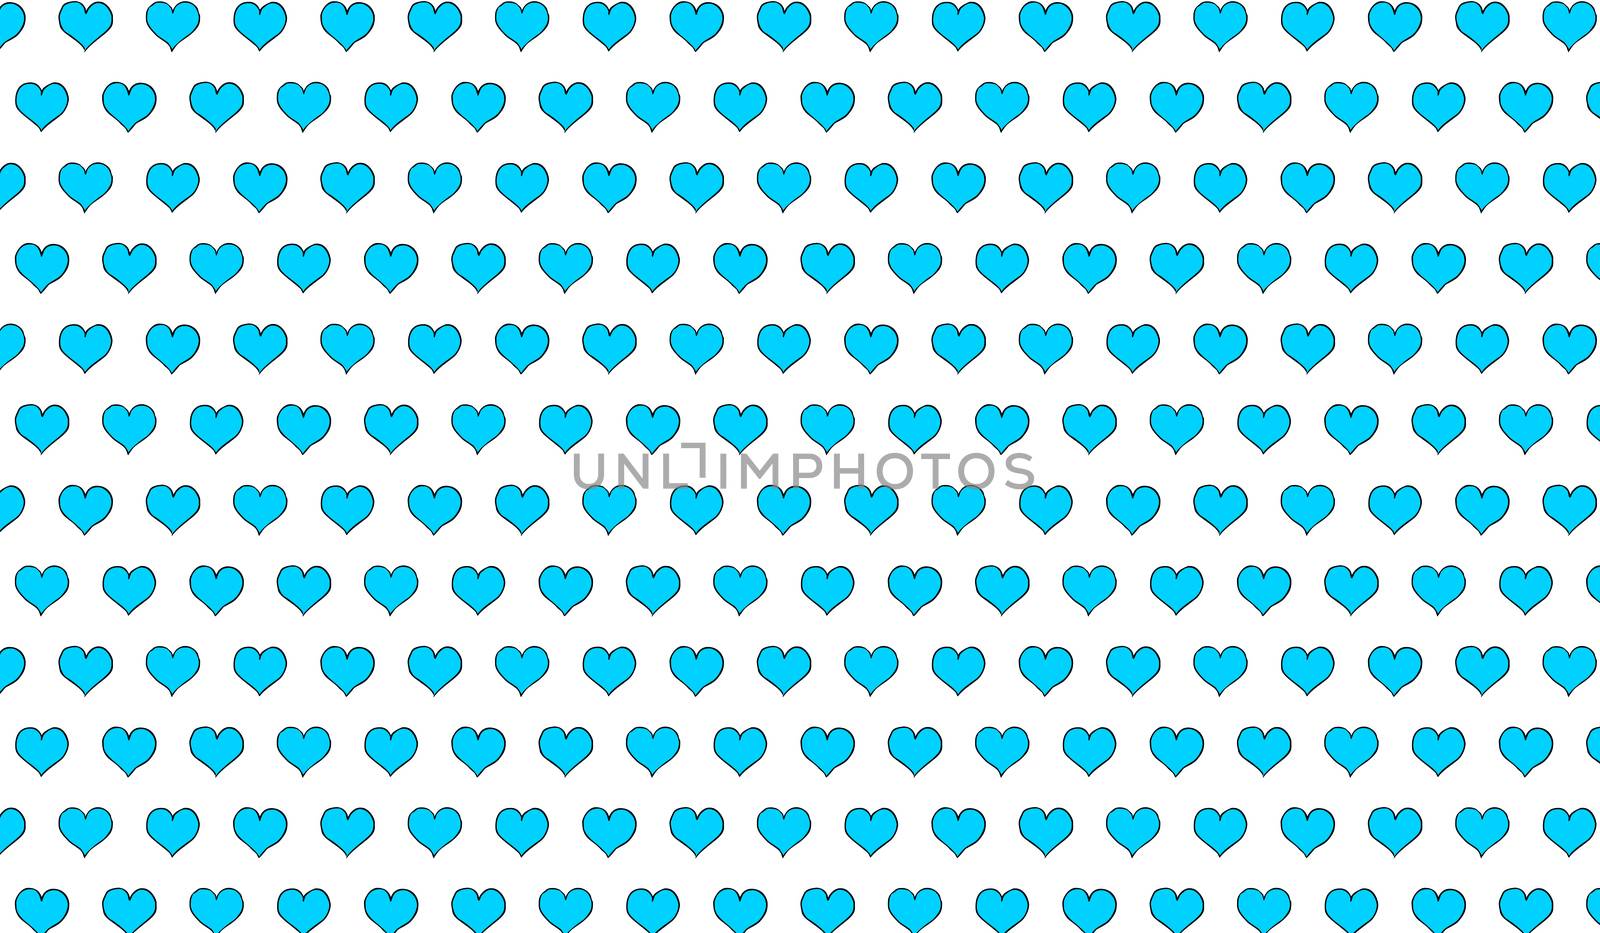 2d azure pattern of cartoon hearts on isolated background by Andreajk3